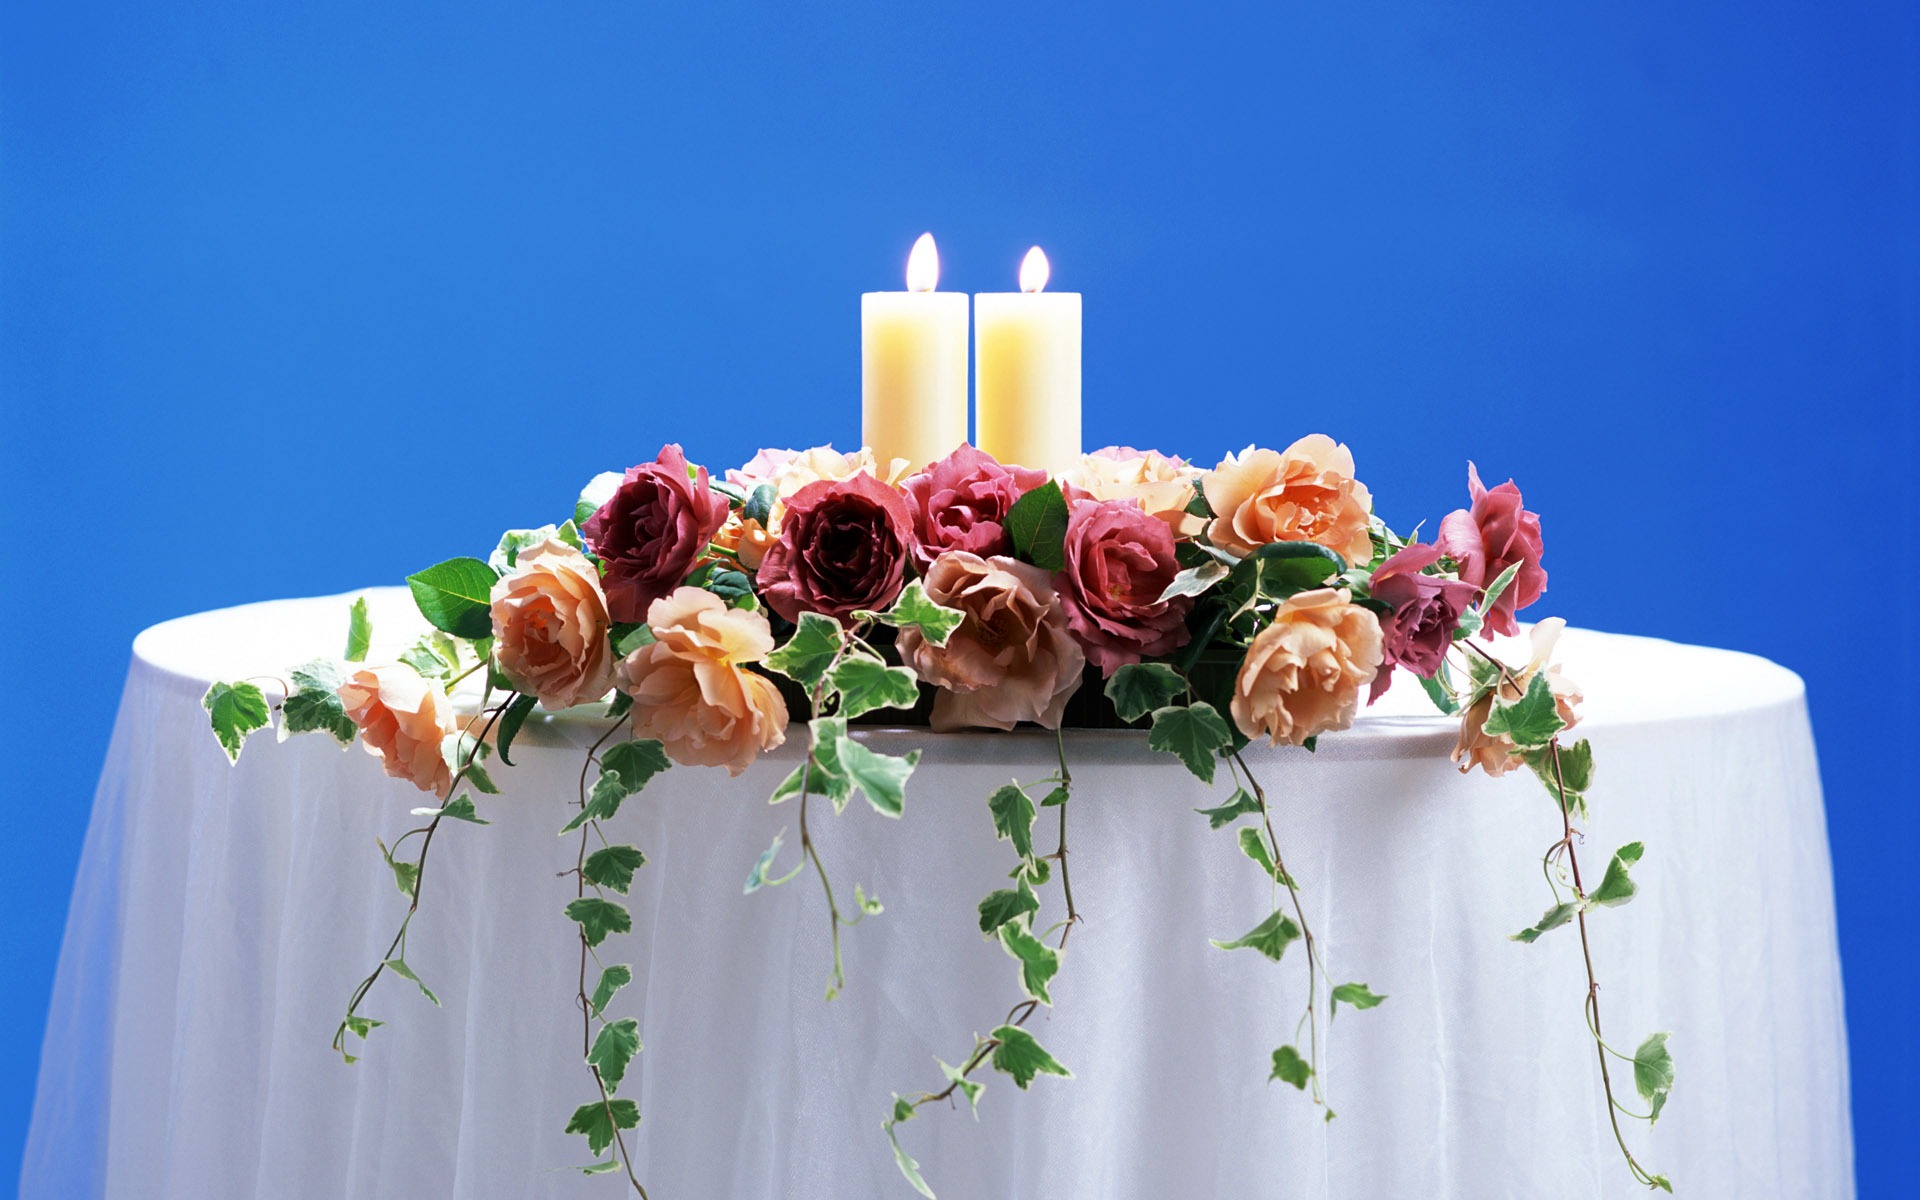 Weddings and Flowers wallpaper (2) #13 - 1920x1200